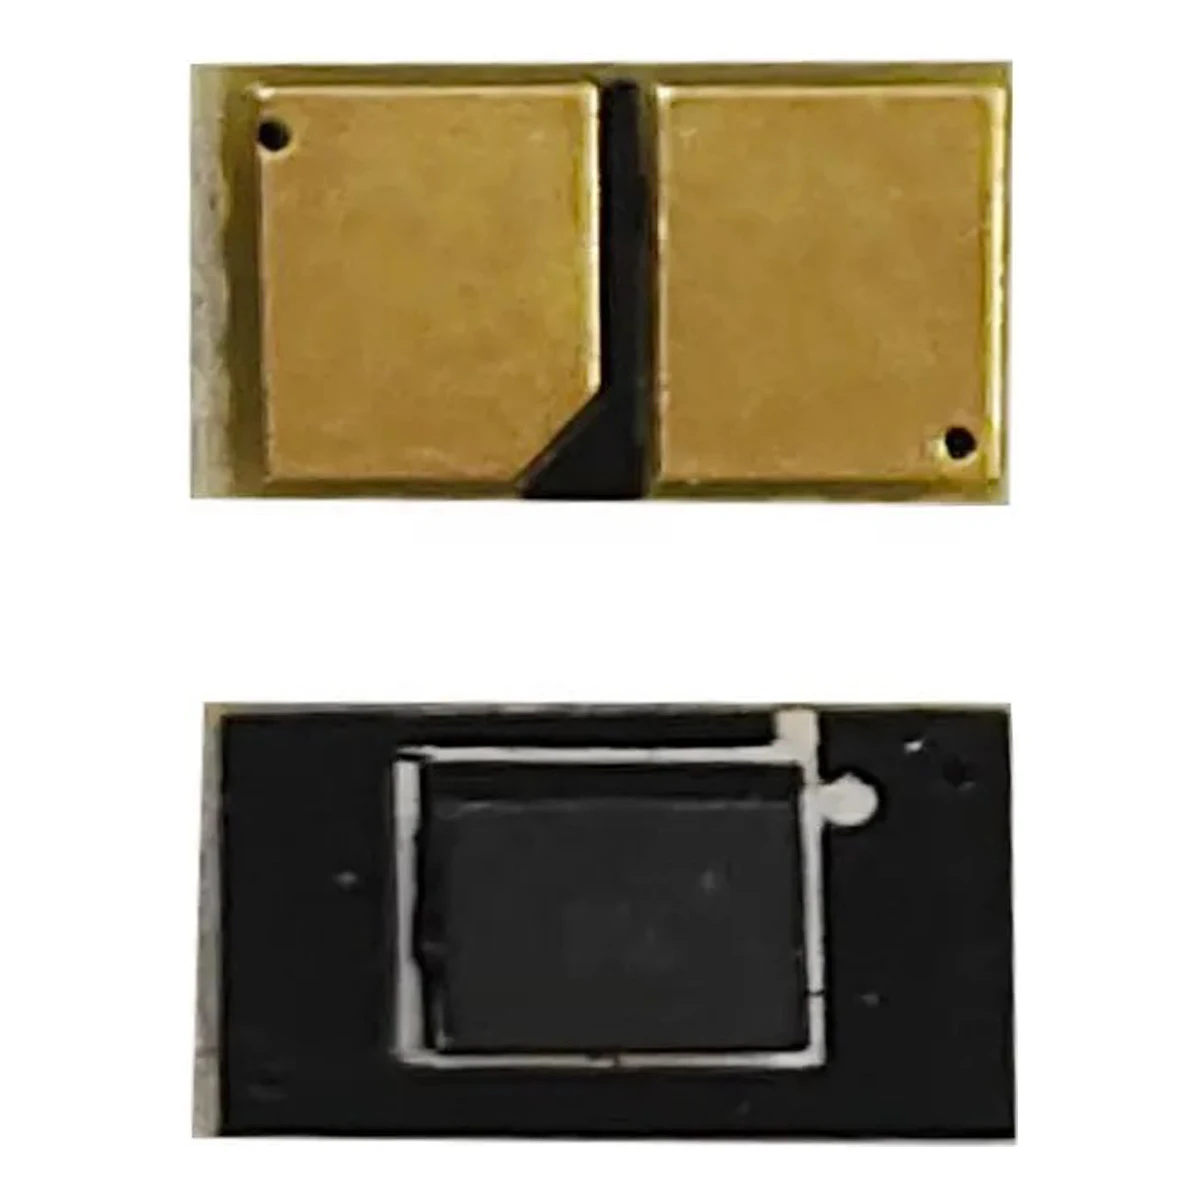 

Image Imaging Unit Drum Chip FOR Canon IR C 3480 i C 3580 i C 3880 F iR C2550 i for Canon GPR23DK GPR23DC GPR23DM GPR23DY